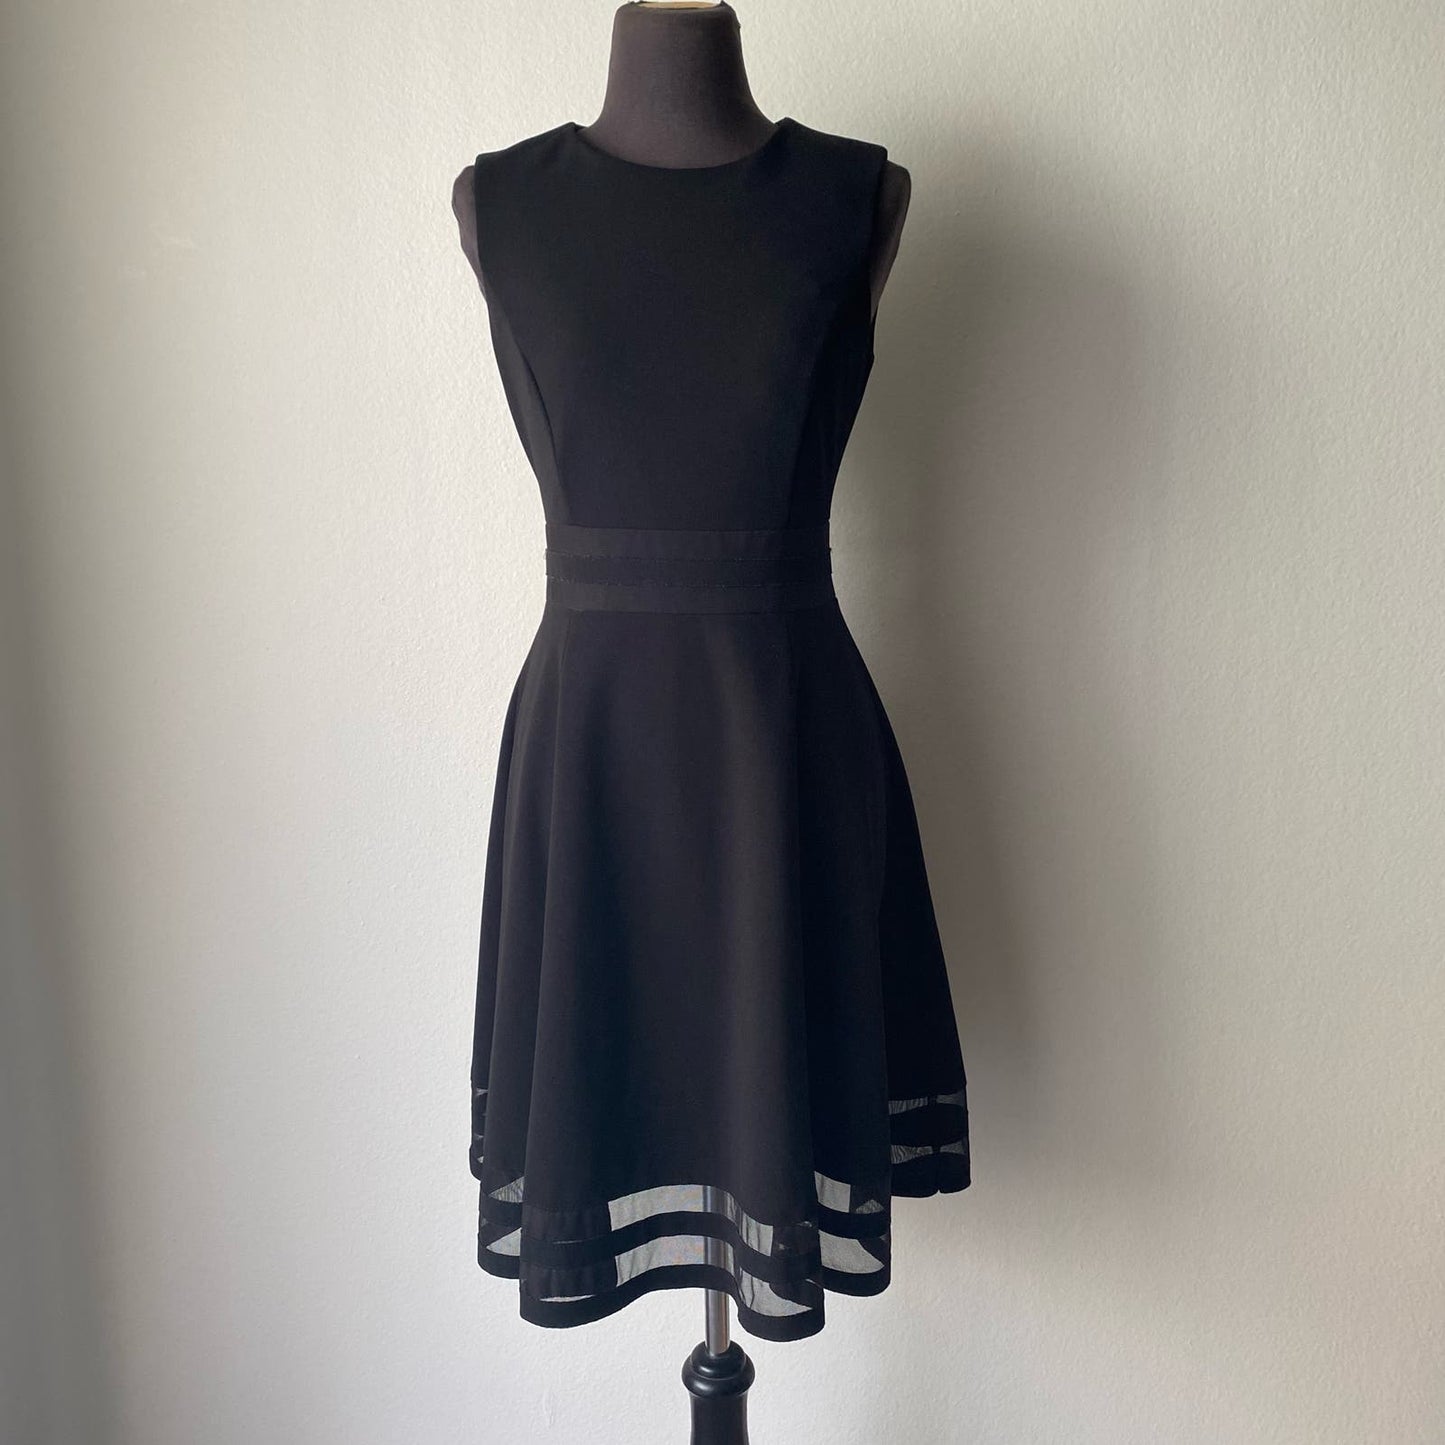 Calvin Klein sz 6 Sleeveless crew neck fit and flared dress